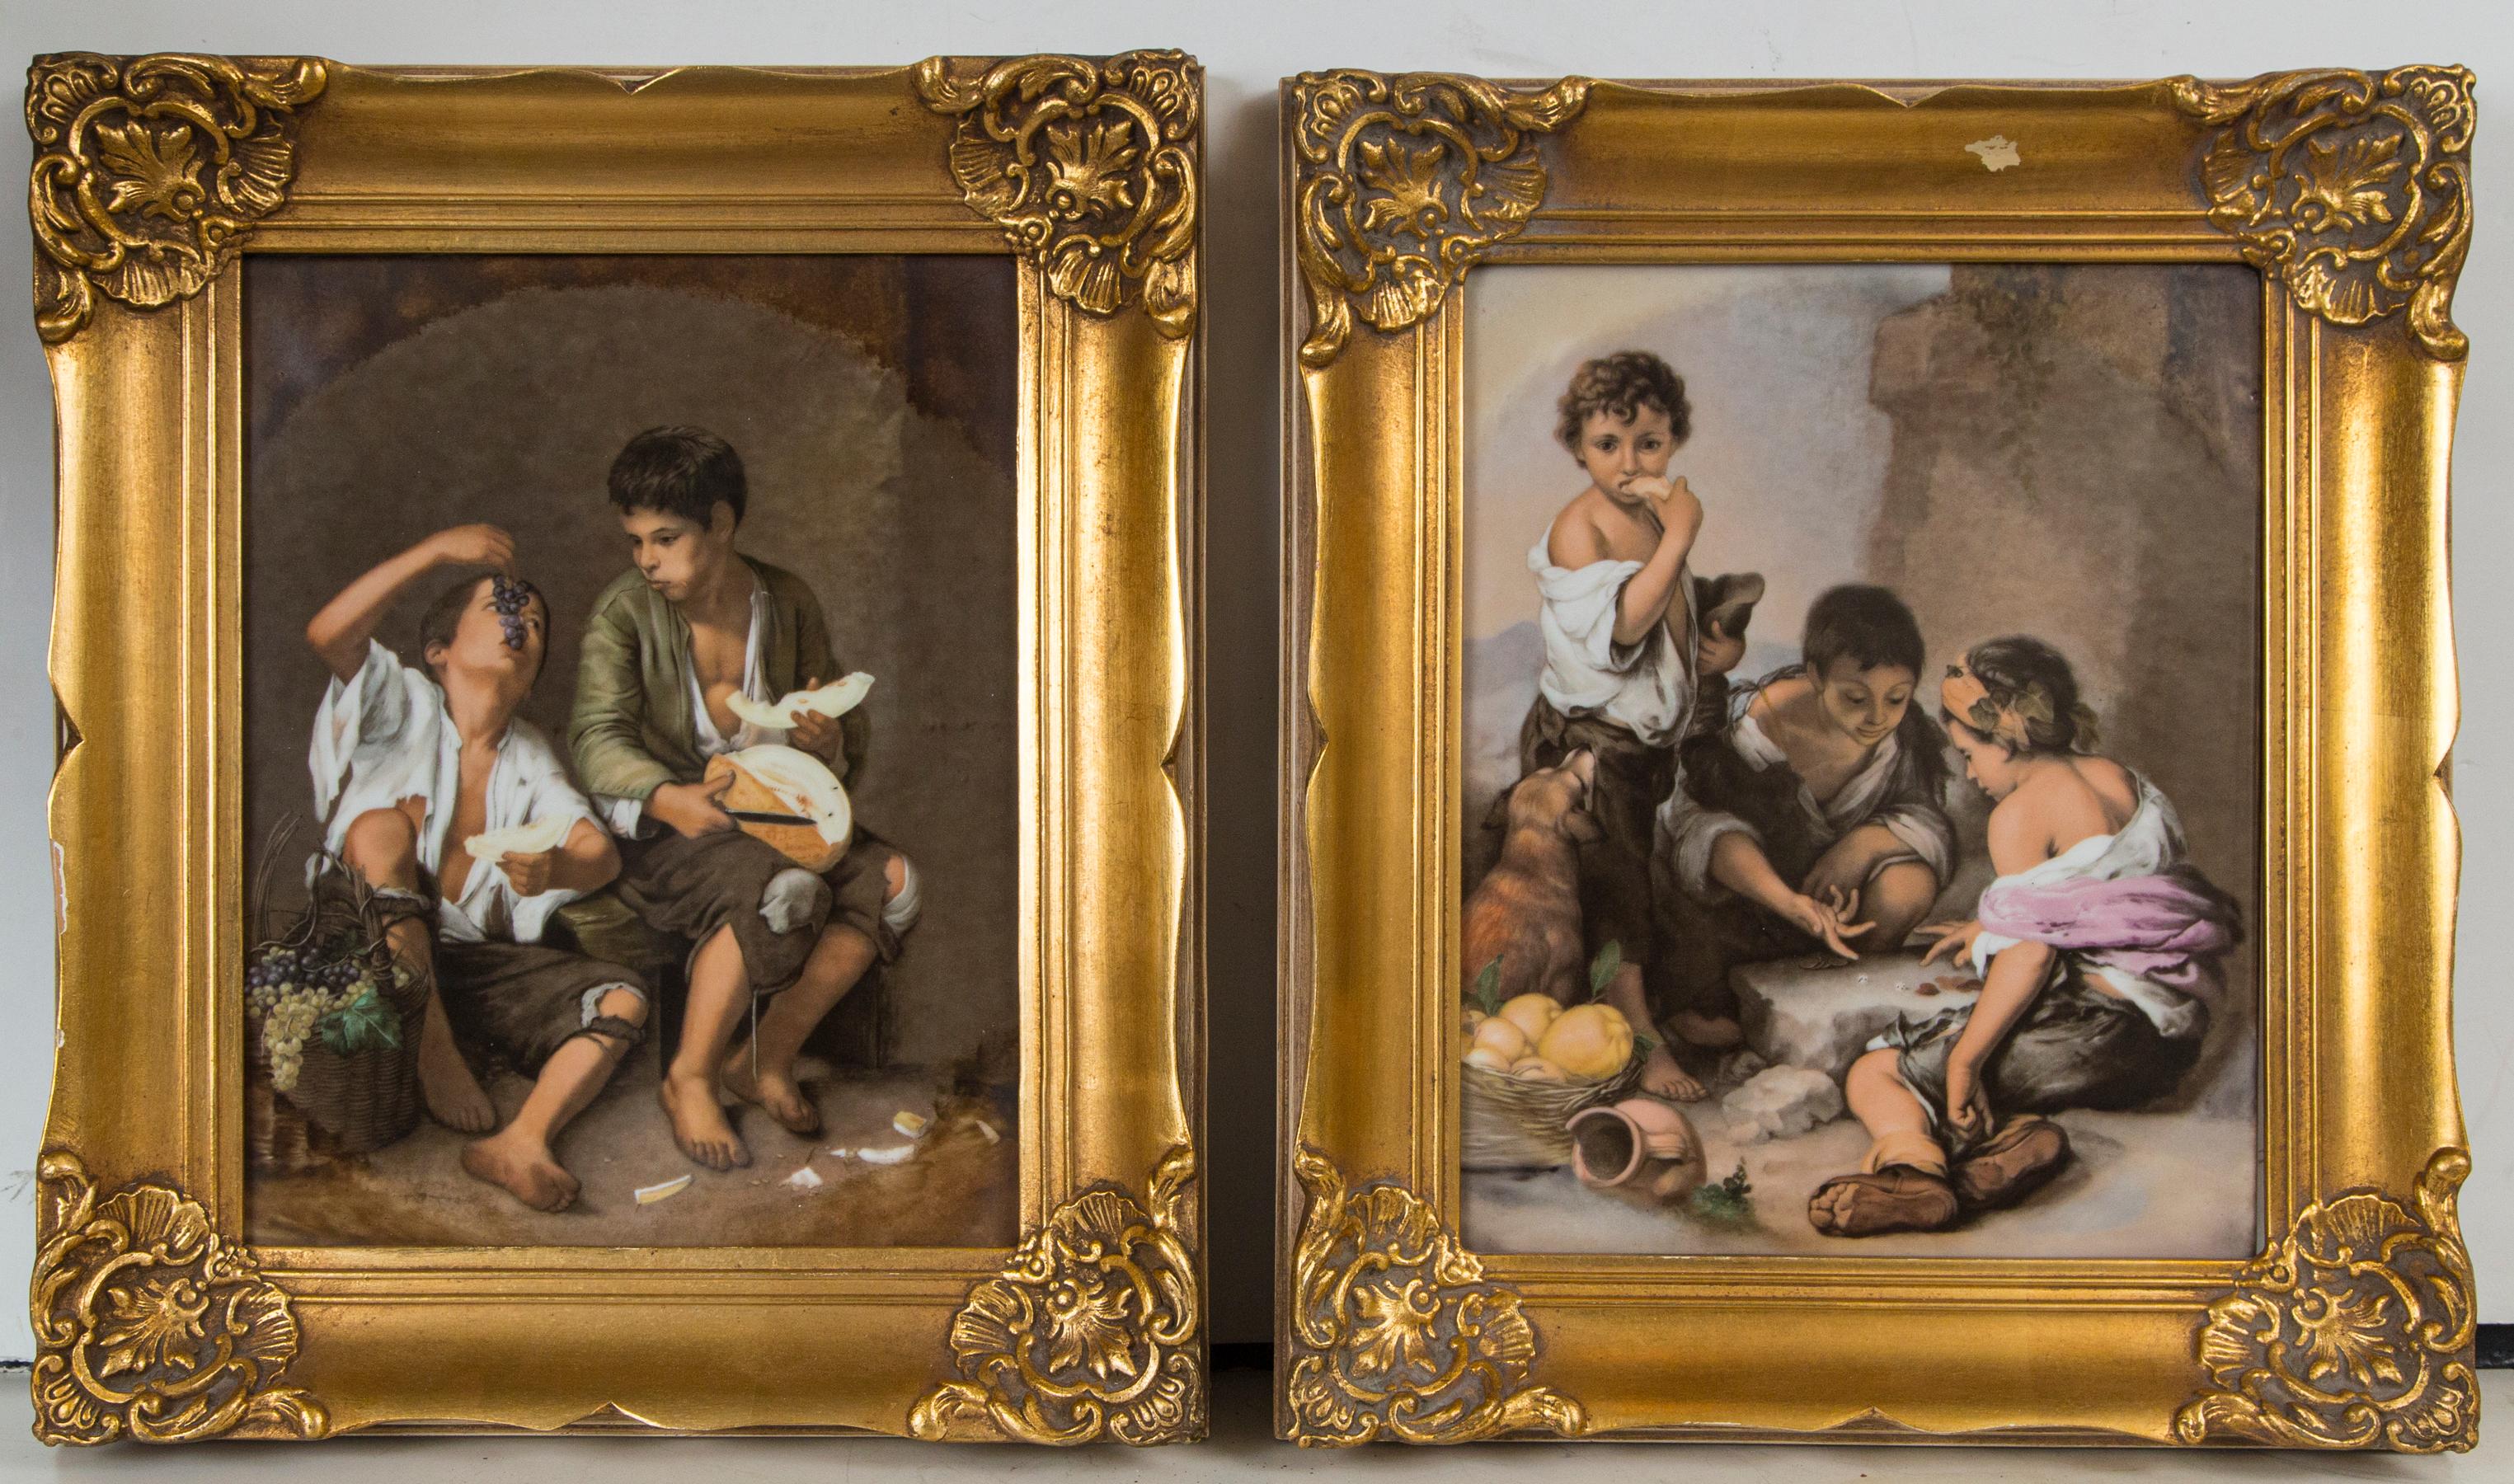 Each within a gilt wood frame. One showing 2 boys enjoying cheese and grapes. The other, 2 playing dice, while a third stands, eating, his dog hoping for some bit of food to drop. The boys all wear torn and tattered clothing.
The back of each